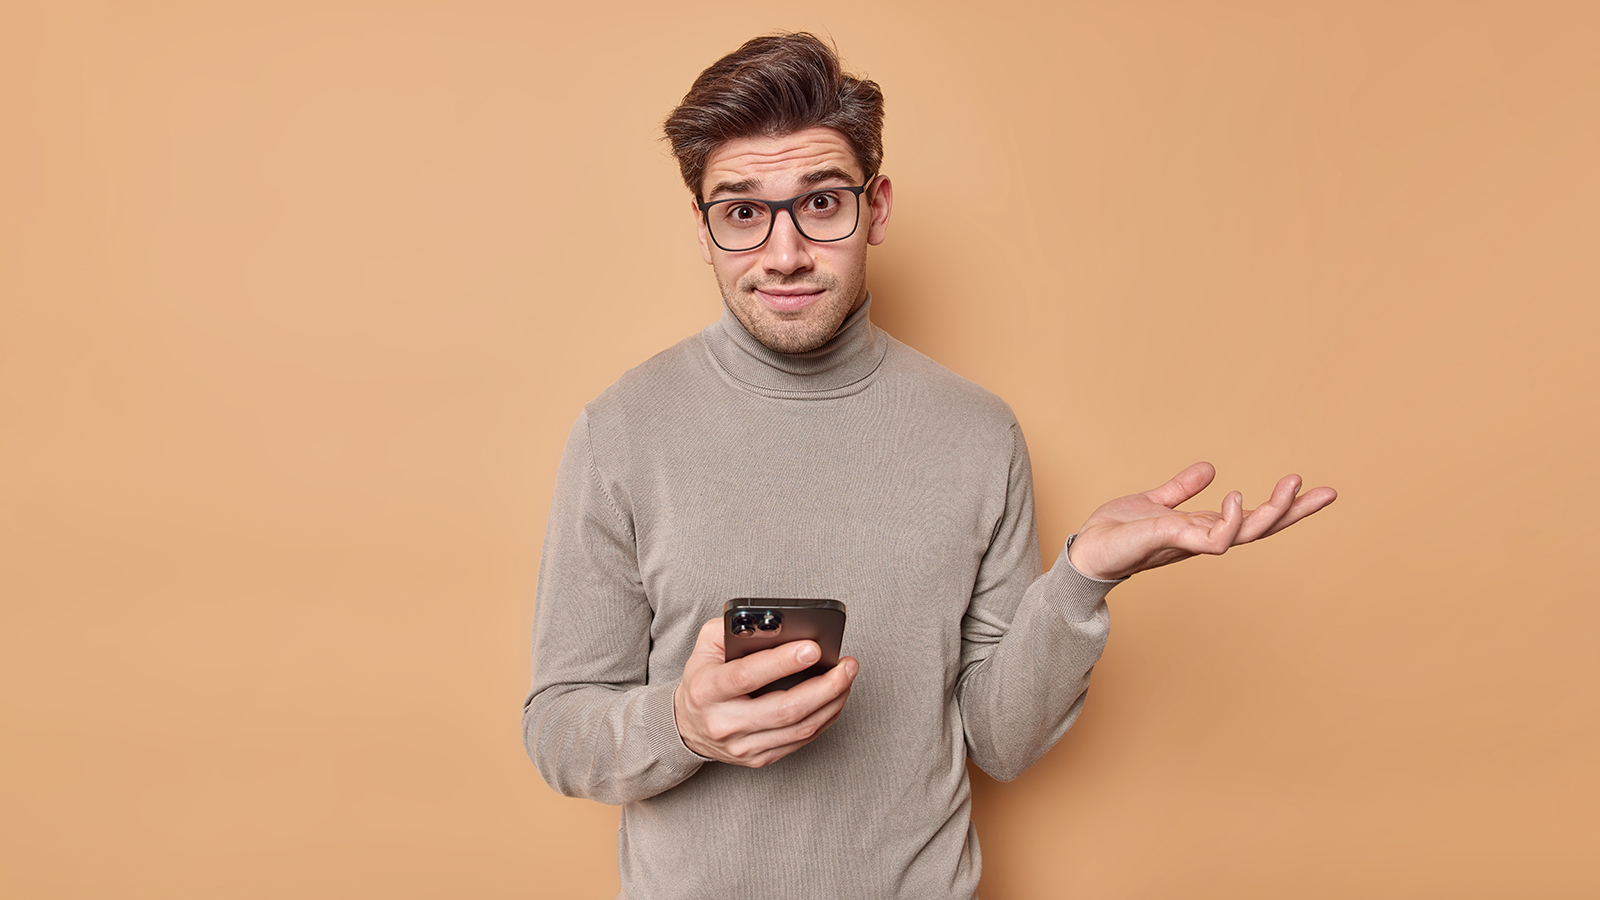 Confused questioned young man shrugs shoulders wears optical glasses and turtleneck holds mobile phone reads something strange browses newsfeed via social networks puzzled about online content